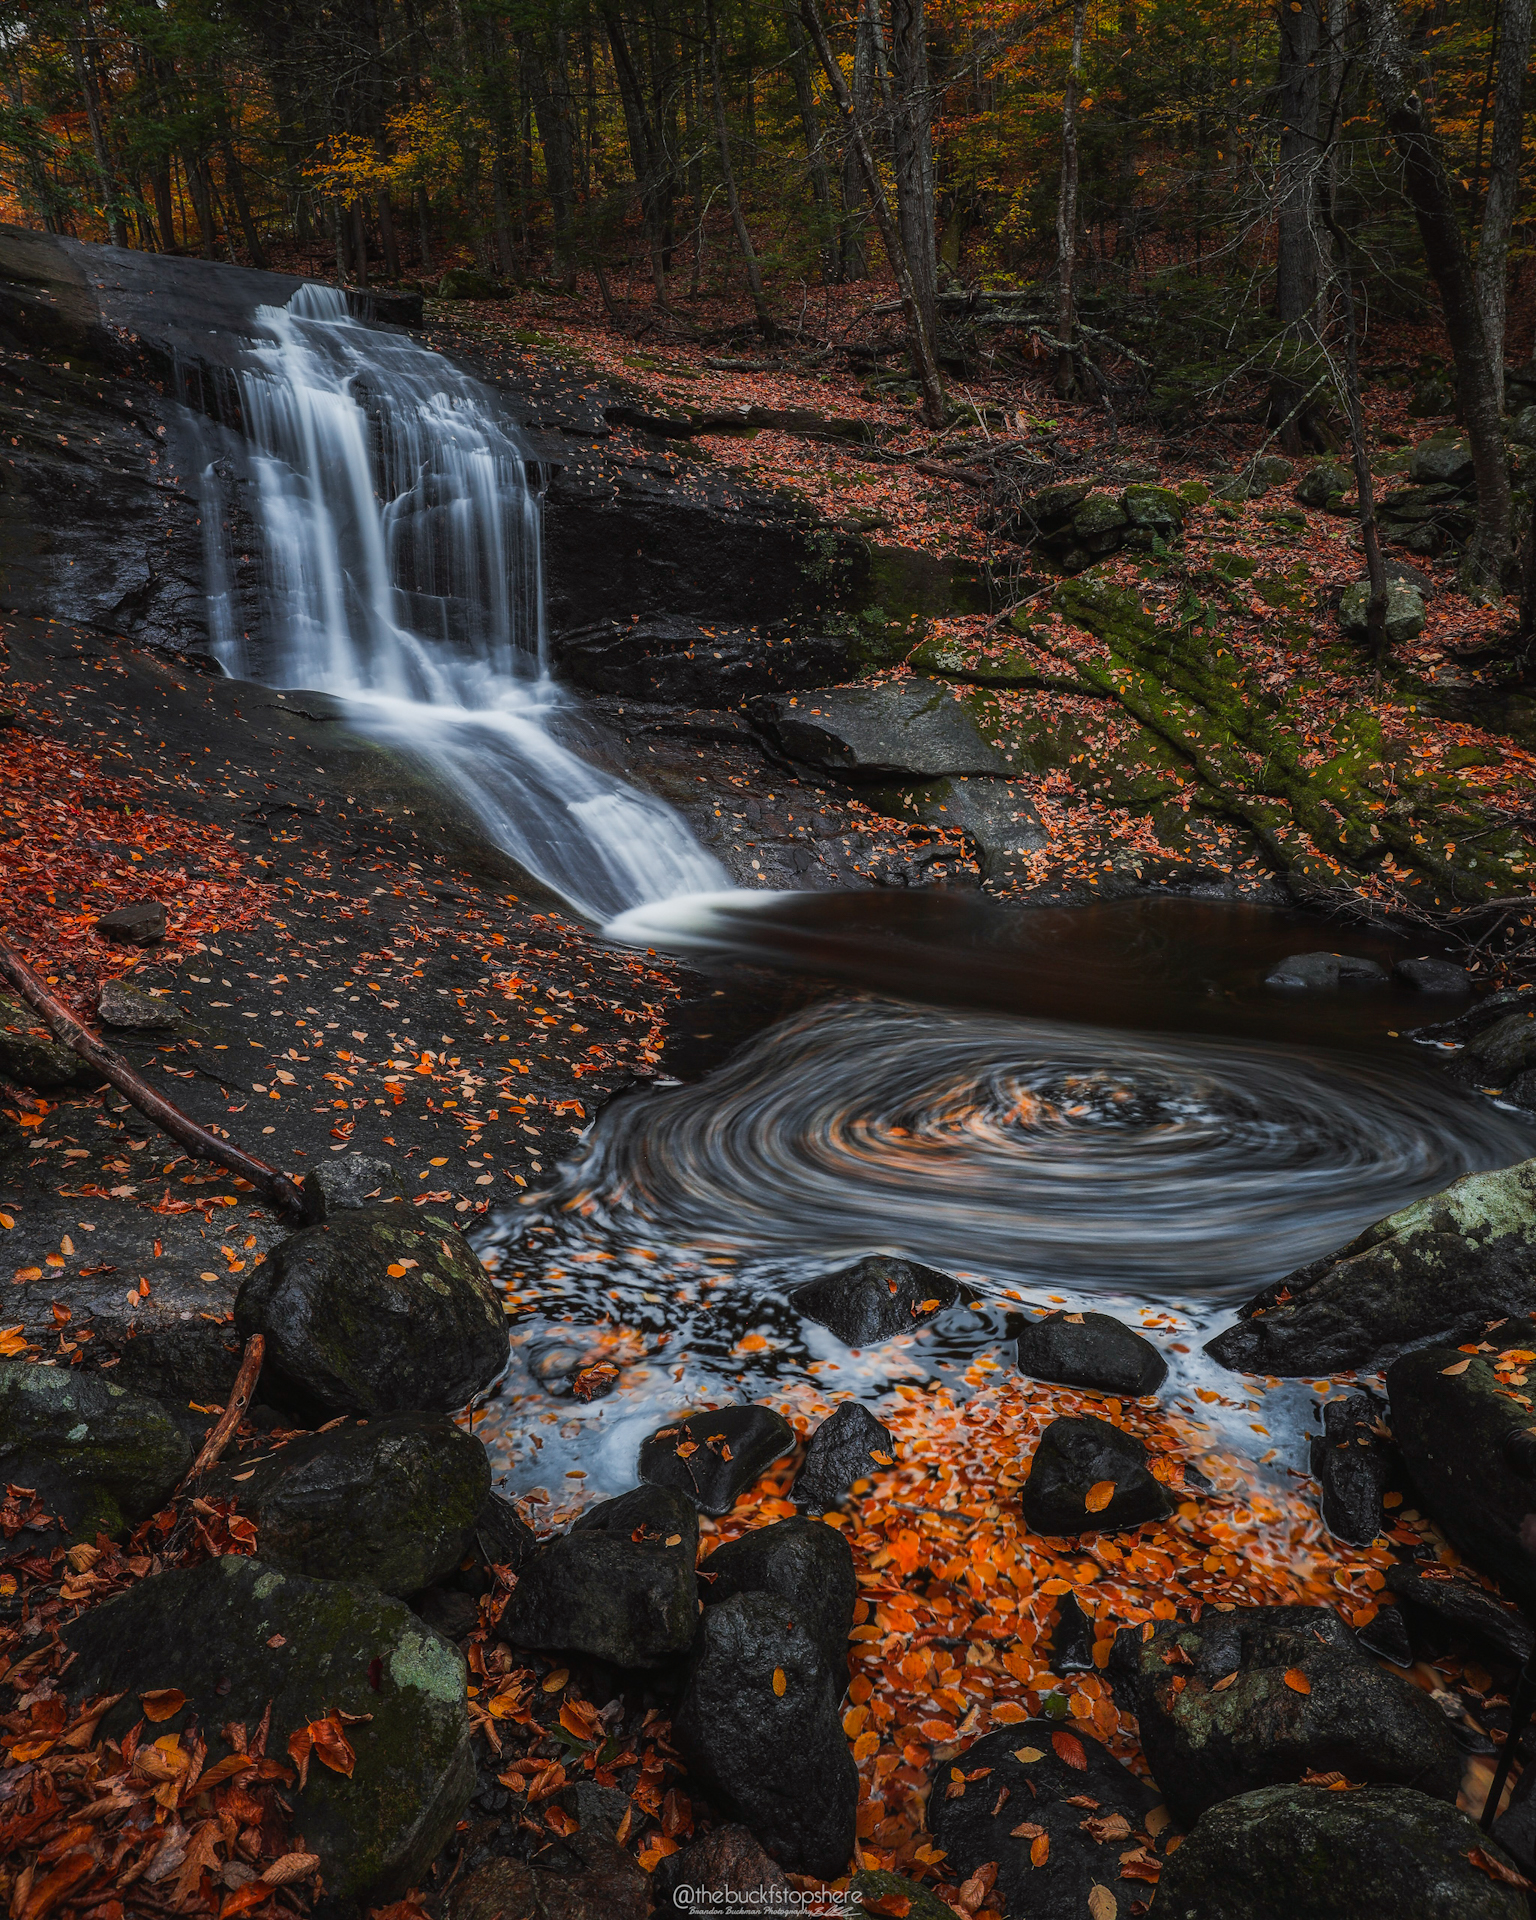 How to start a photography business by popular New England photographer, Shannon Shipman: image of a waterfall and red and orange leaves on the ground. 